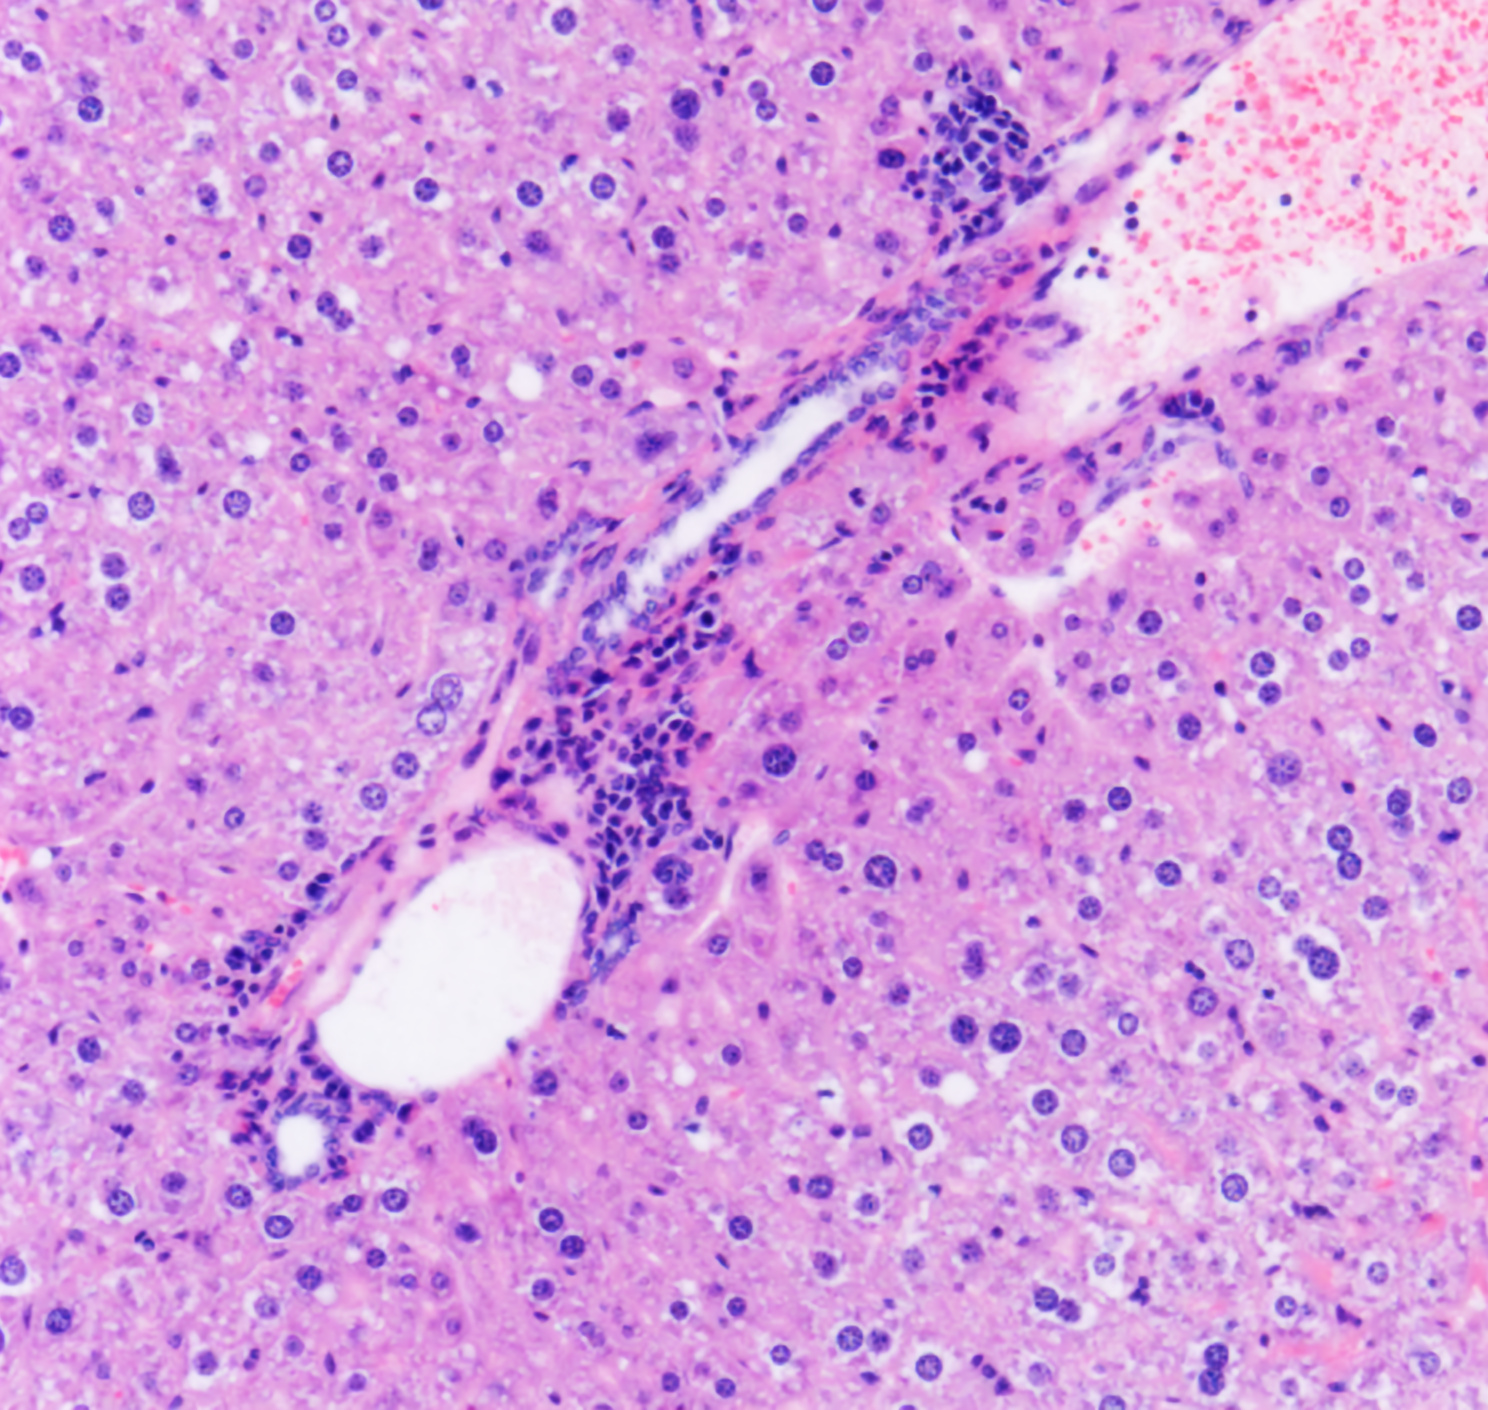 A microscope image of an aged mouse liver showing signs of chronic inflammation